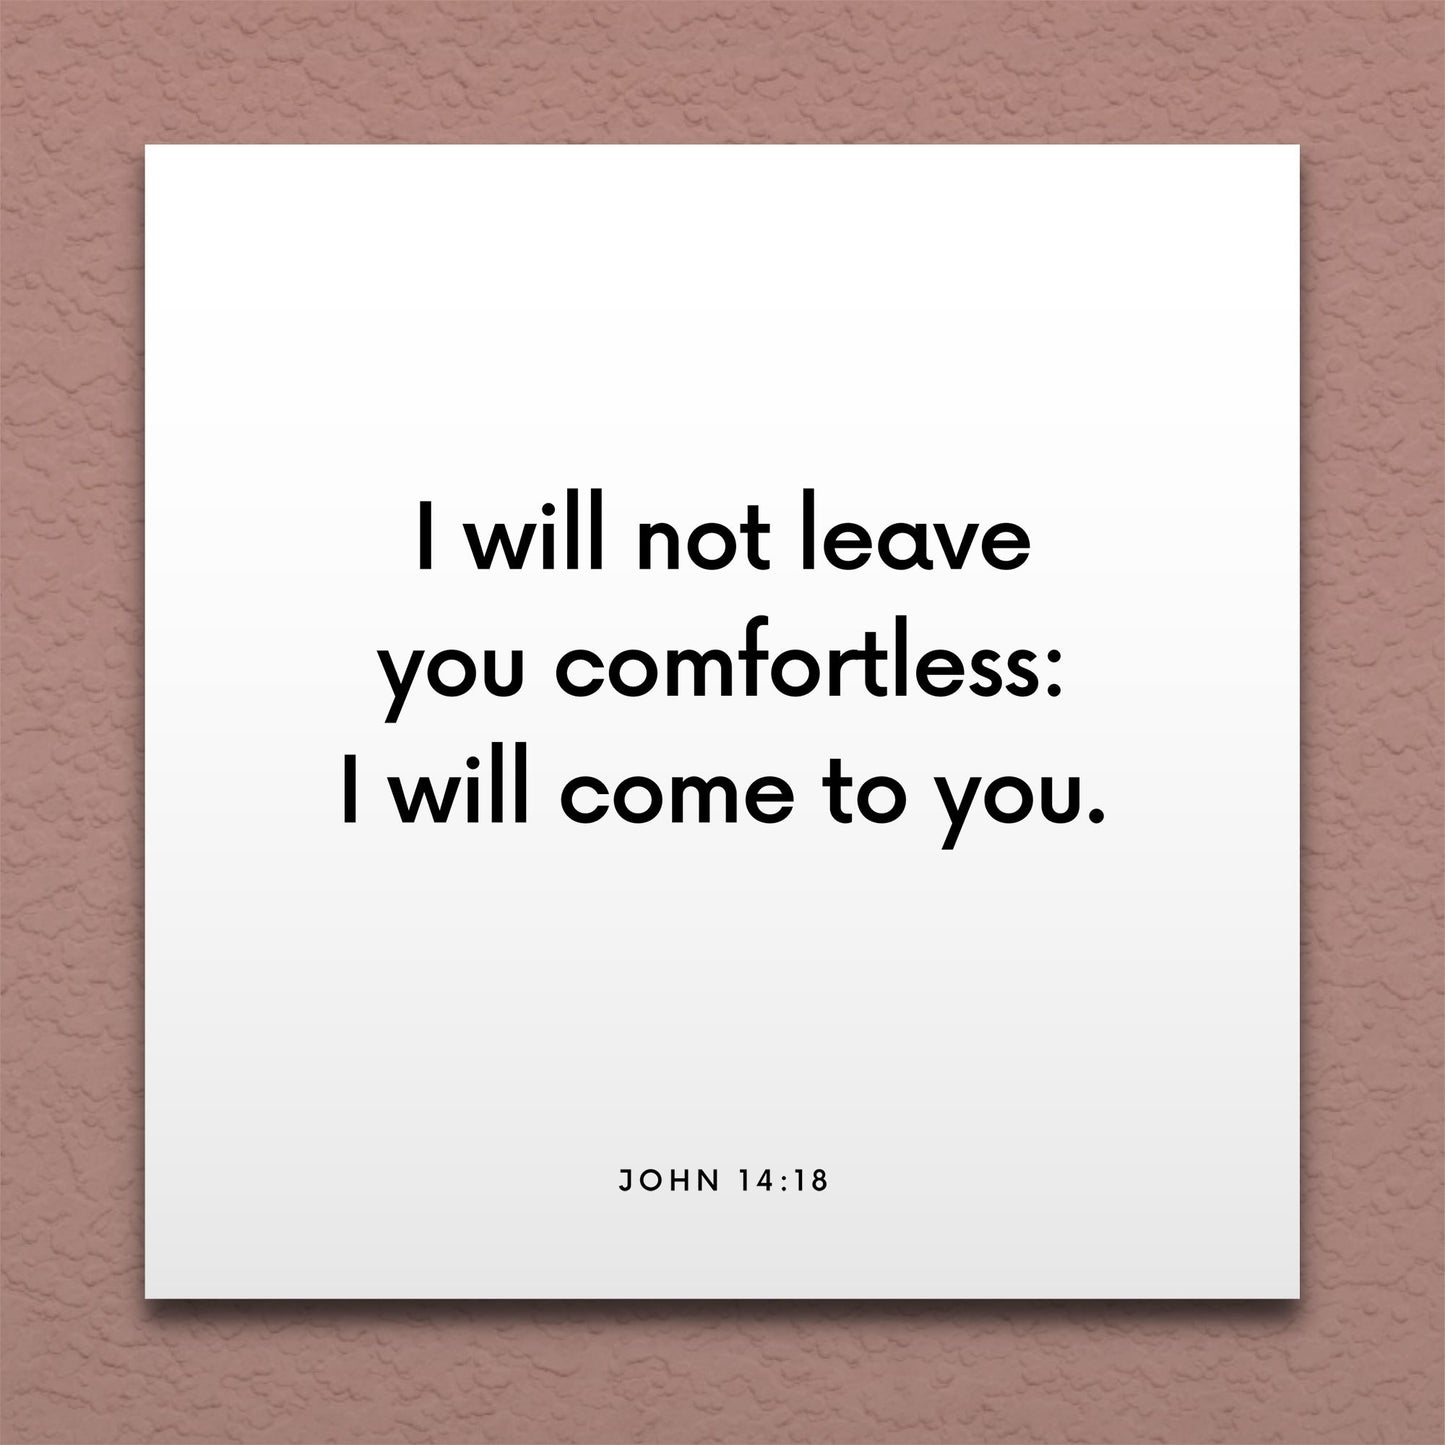 Wall-mounted scripture tile for John 14:18 - "I will not leave you comfortless: I will come to you"